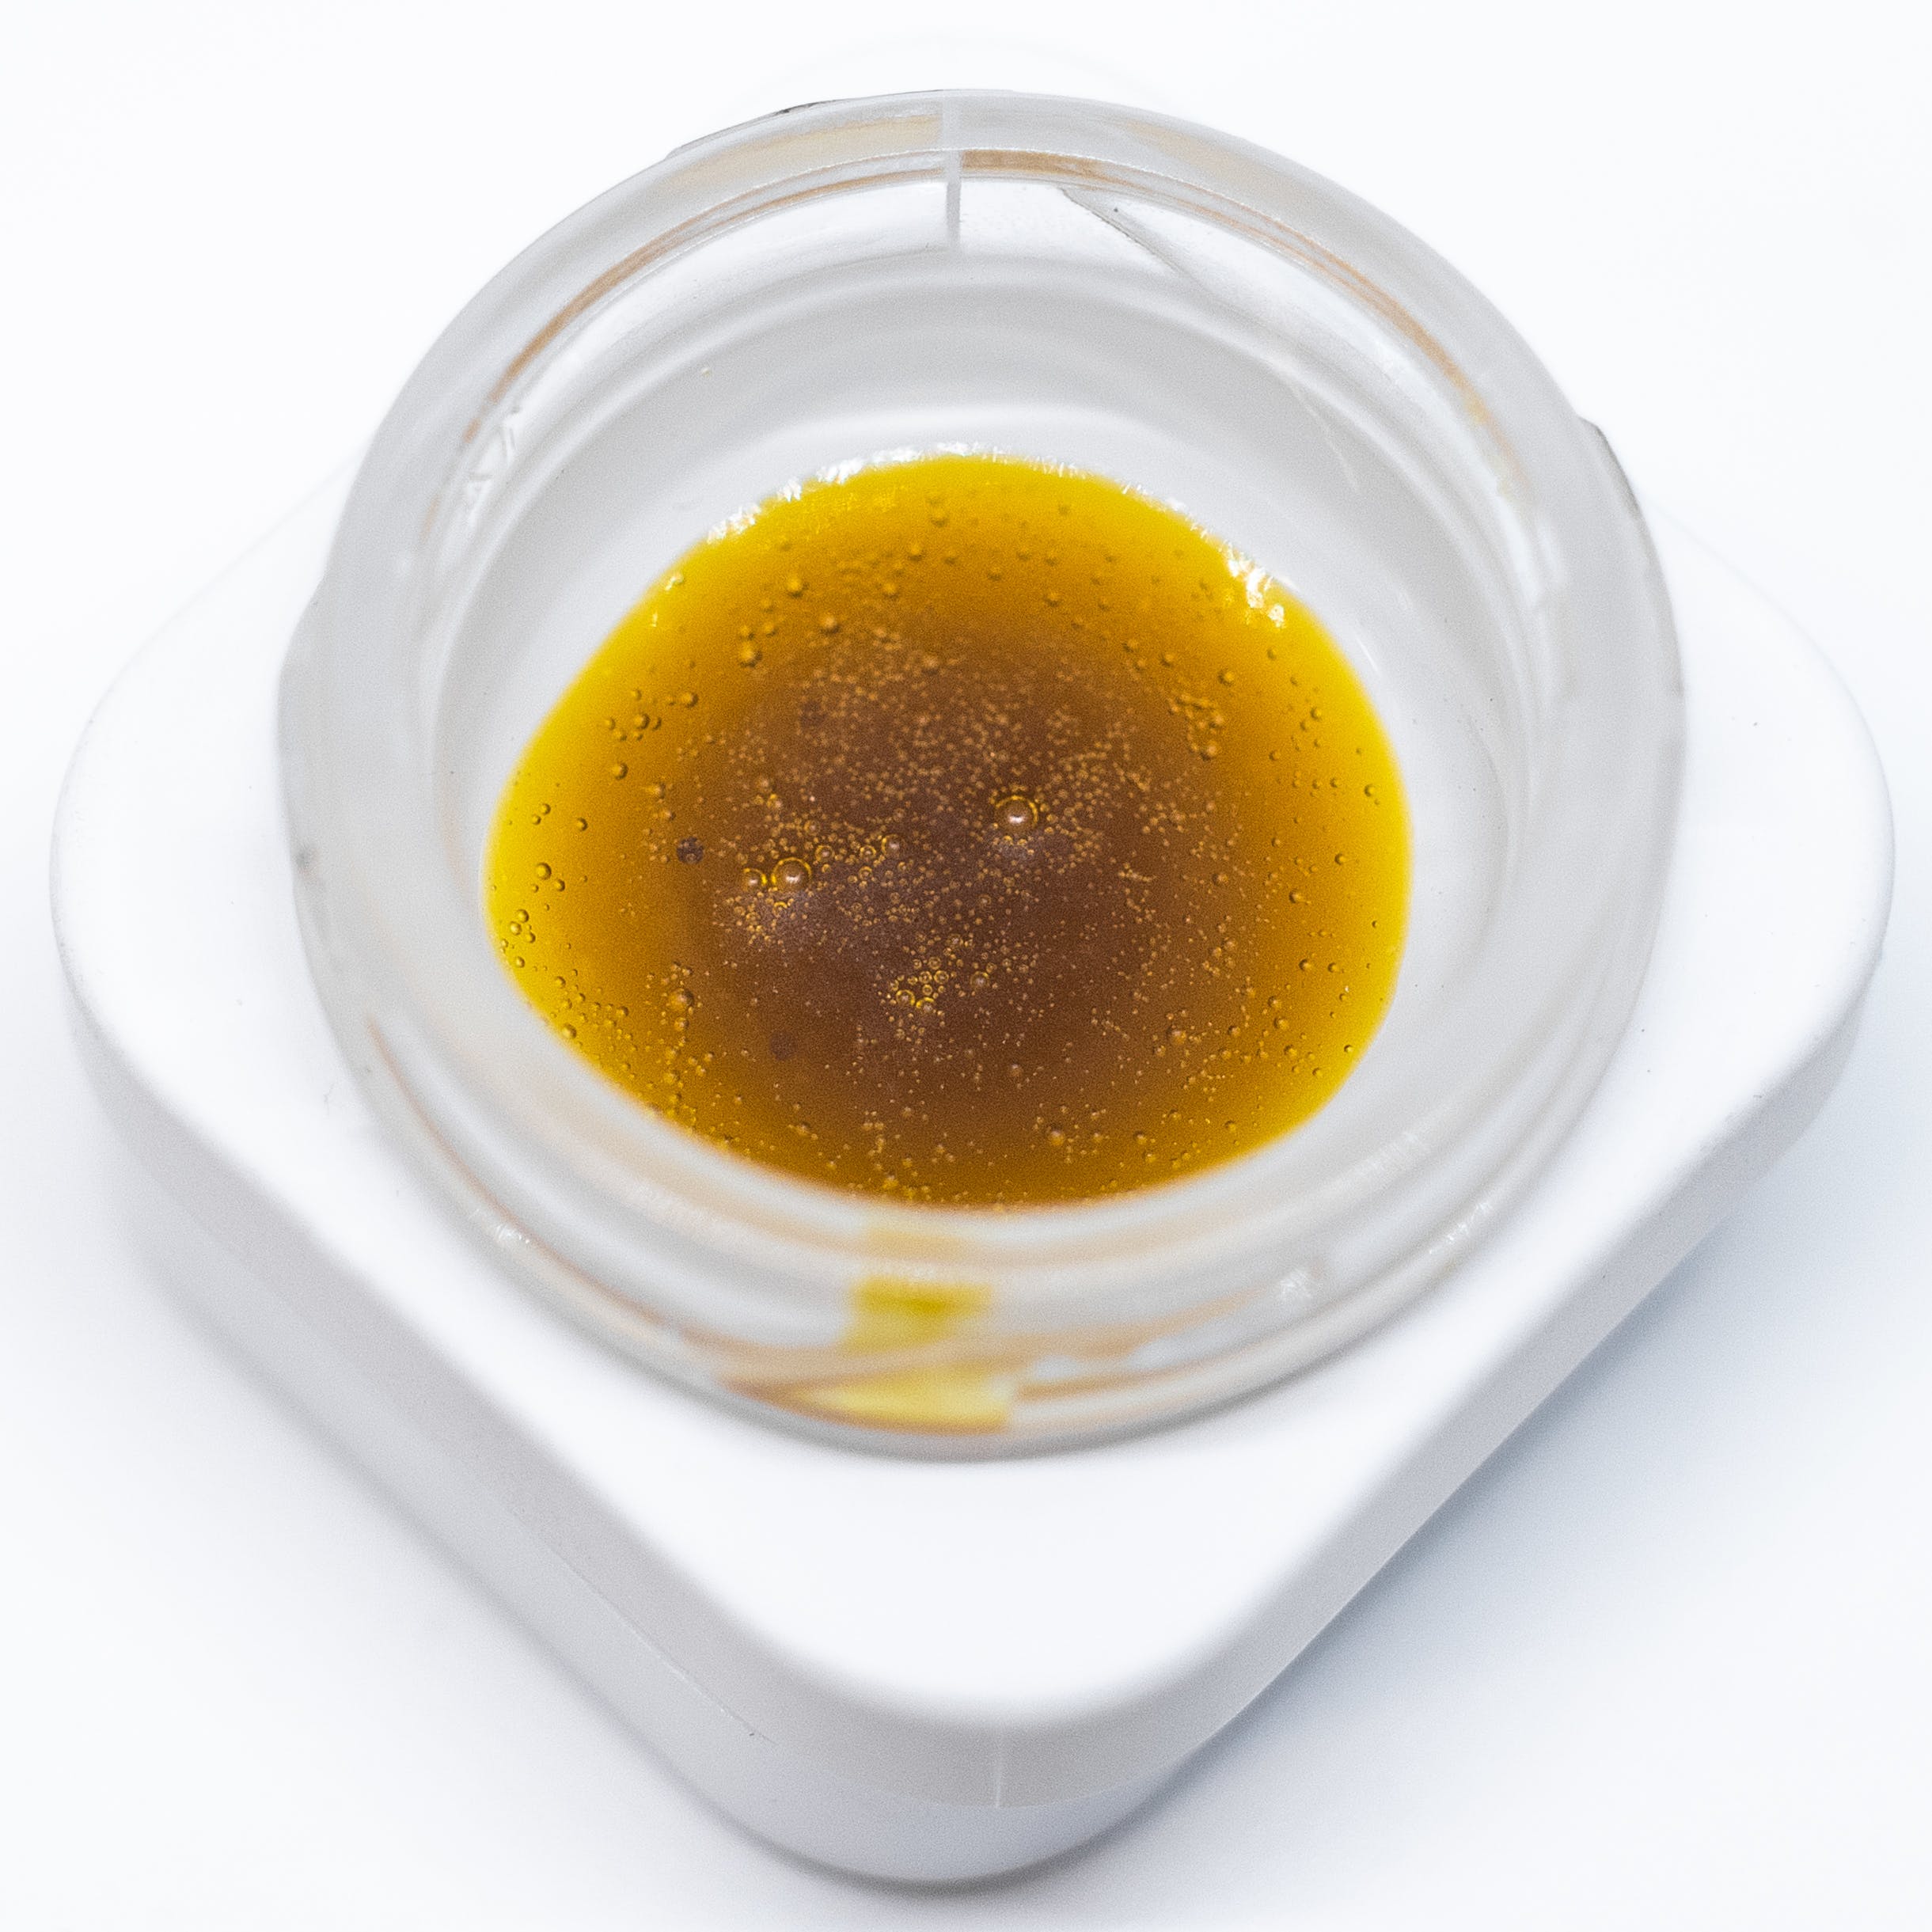 concentrate-2445-csc-cherry-lime-haze-live-wax-s-84-20-25-buy-one-2c-get-one-50-25-off